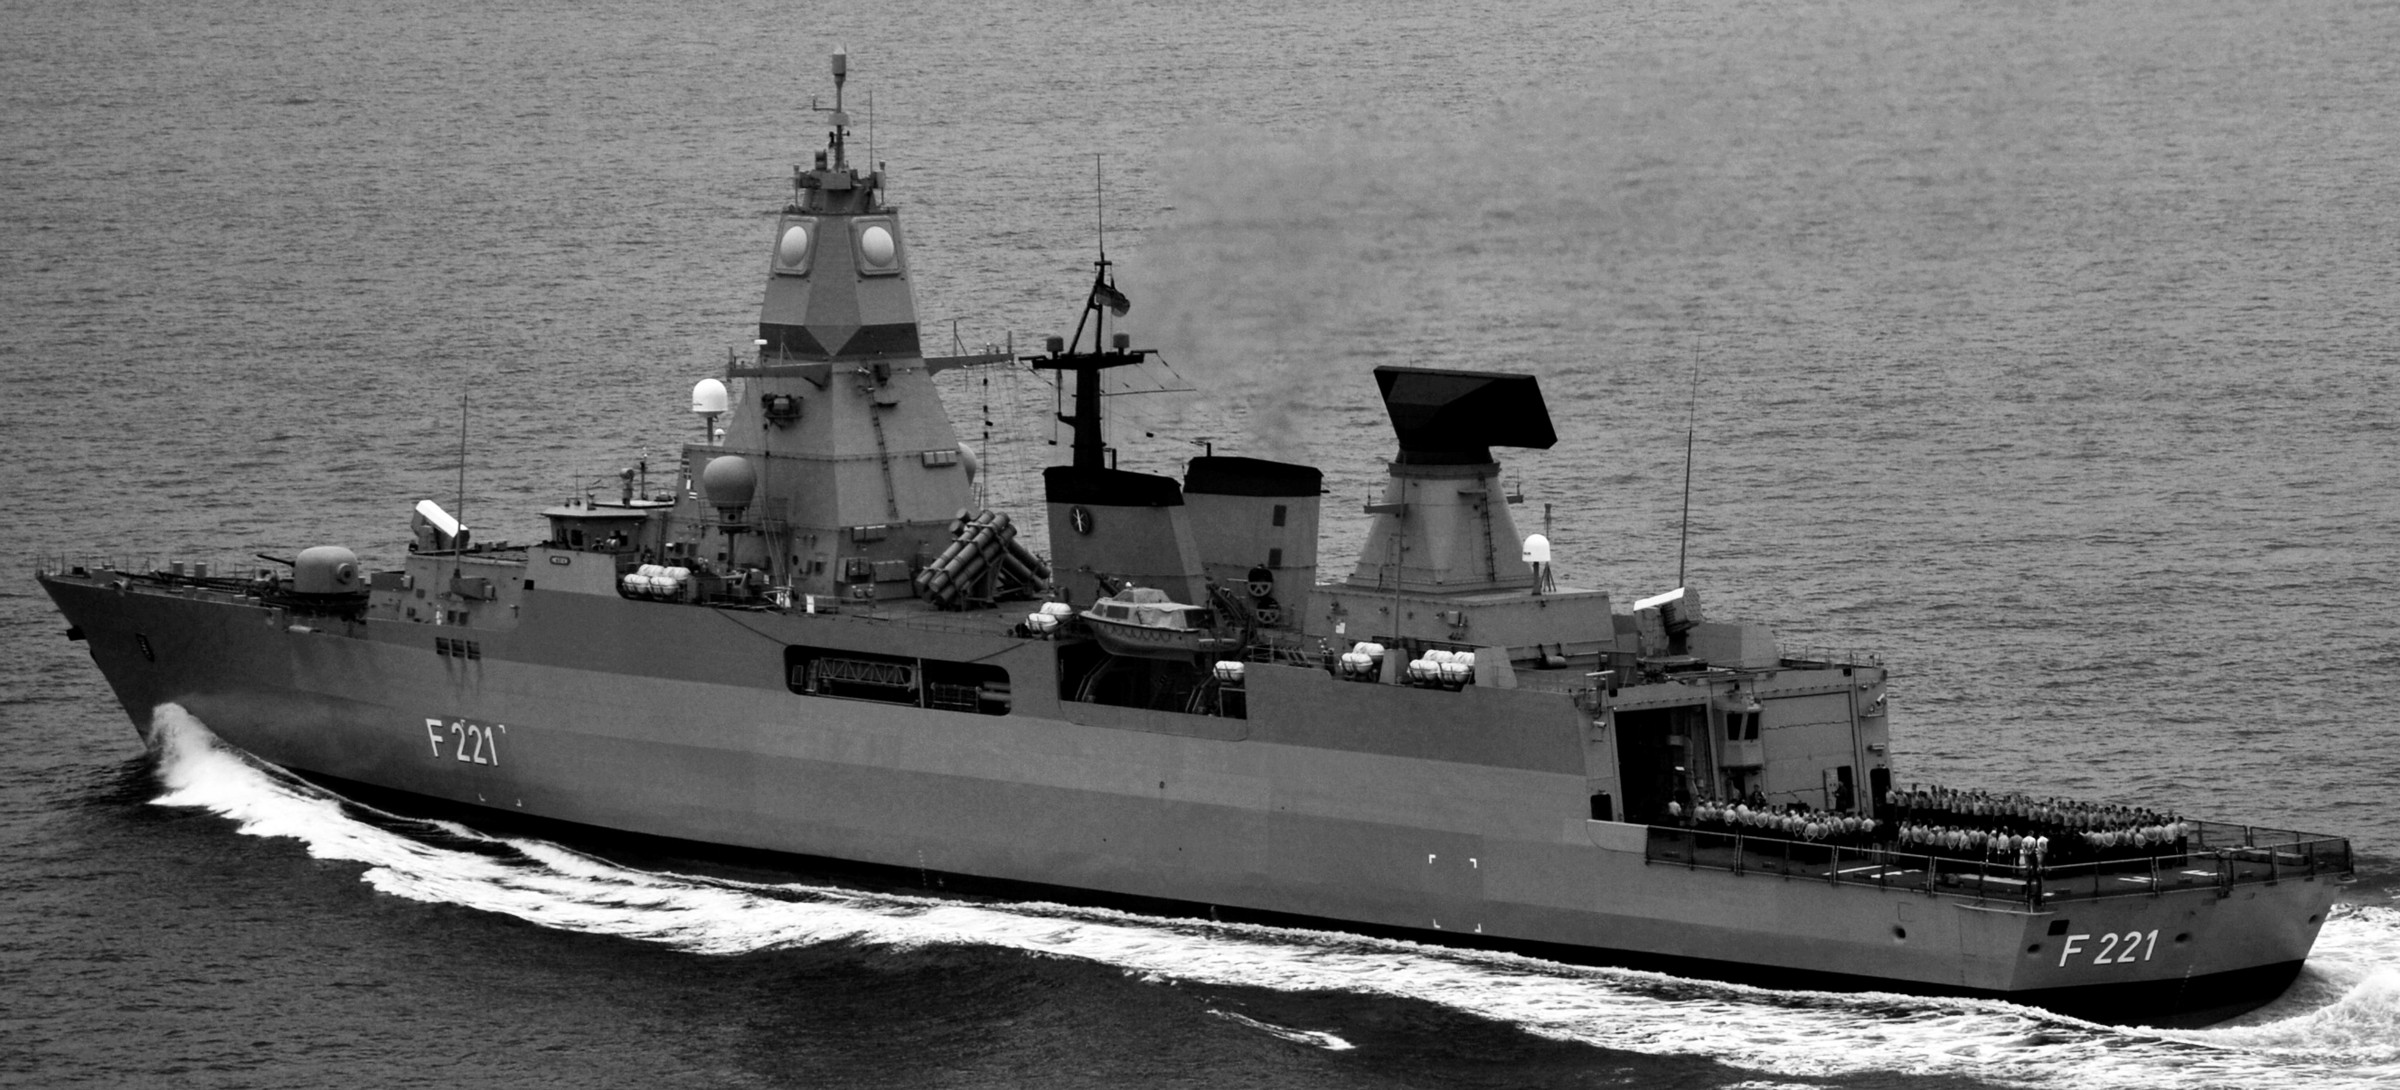 f-221 fgs hessen type 124 sachsen class guided missile frigate german navy 14